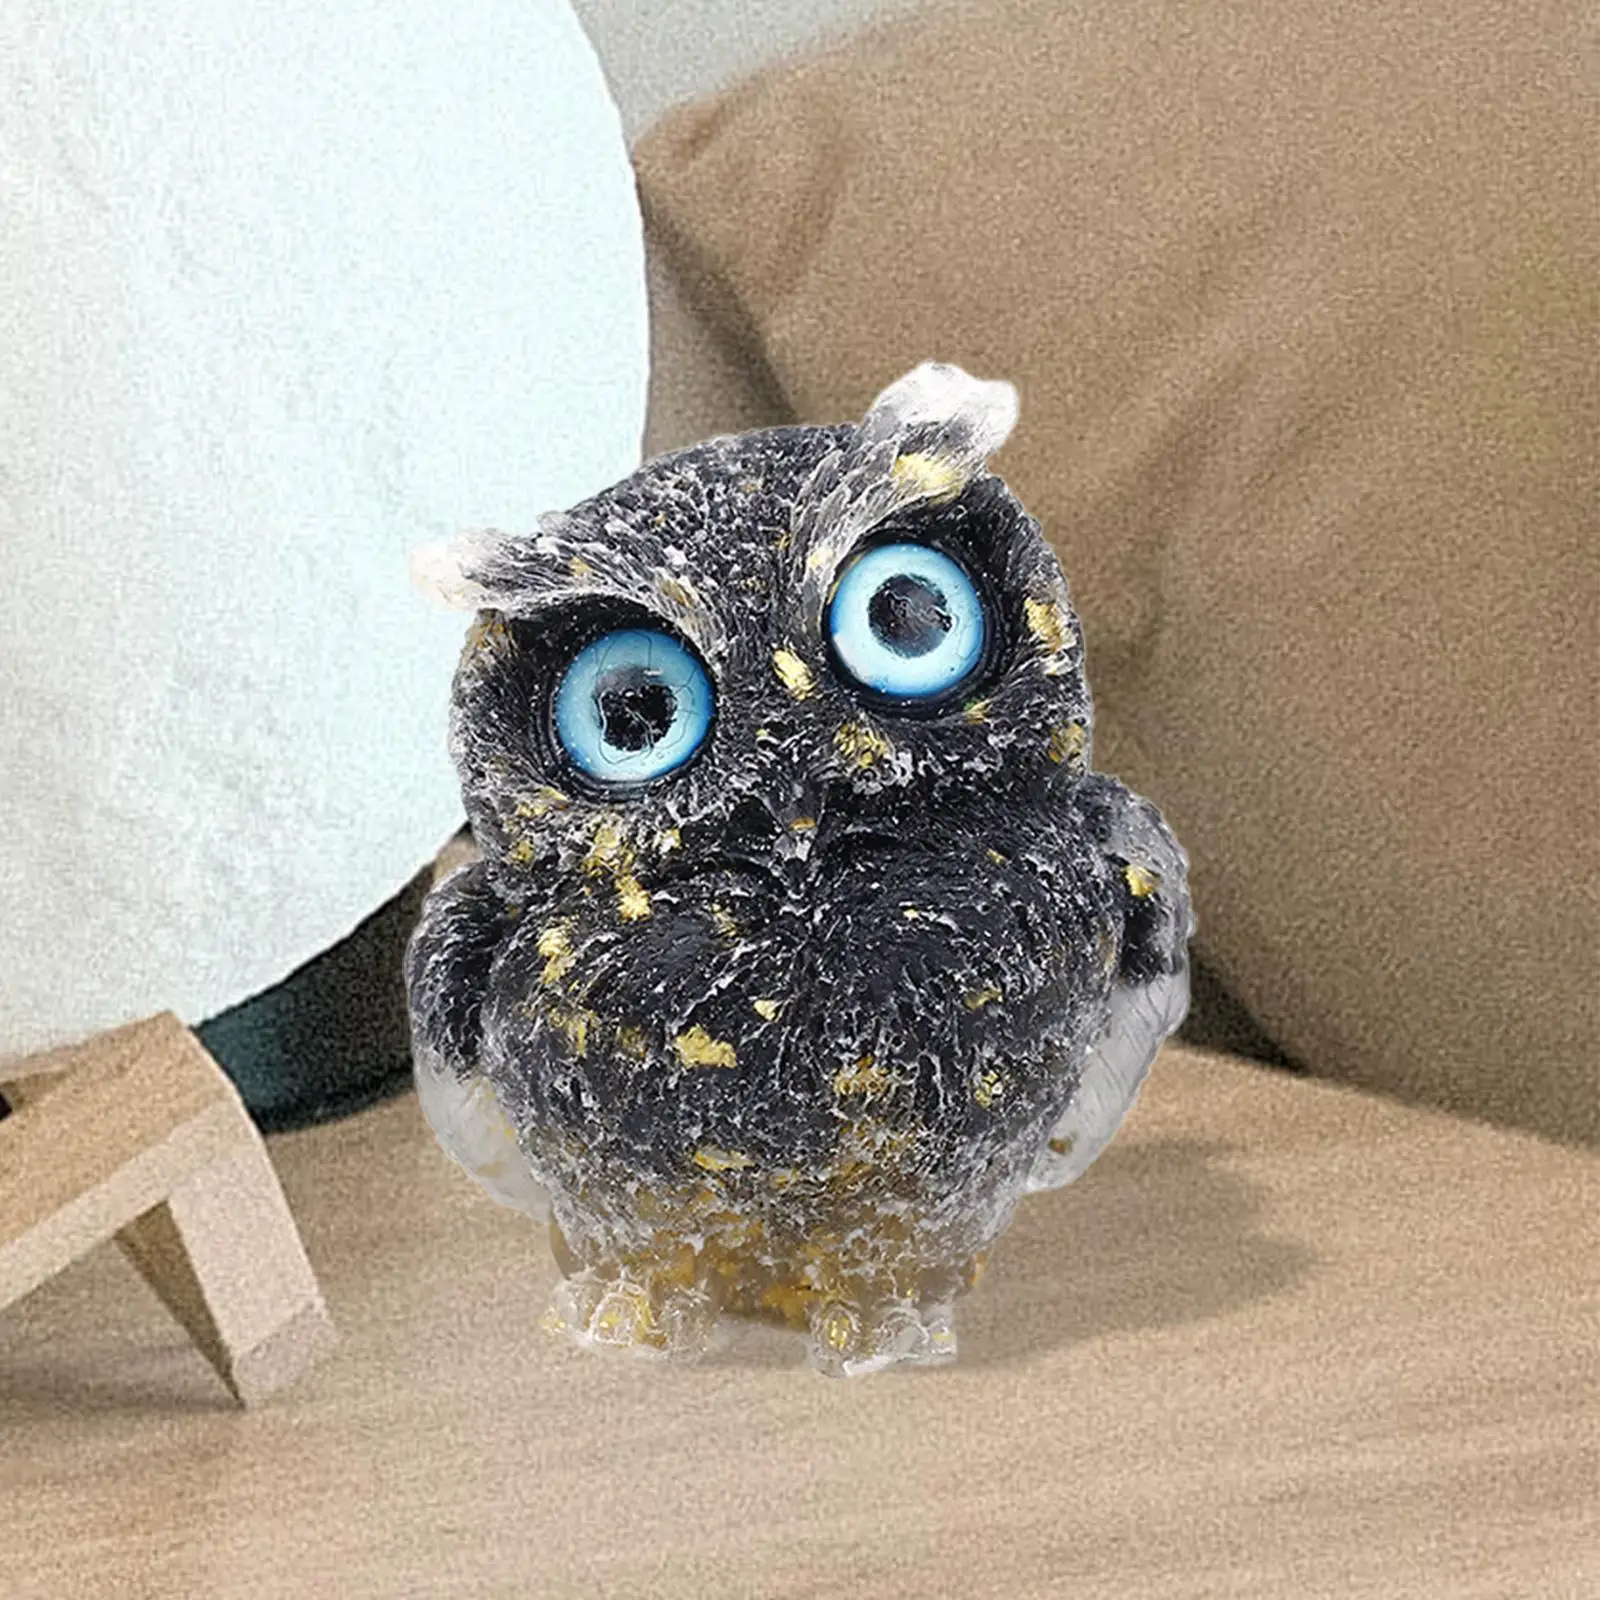 3D Owl Figurines Collectible Home Decor DIY Owl Bird Statue Animal Sculpture for Stand Bedroom Tabletop Decorative